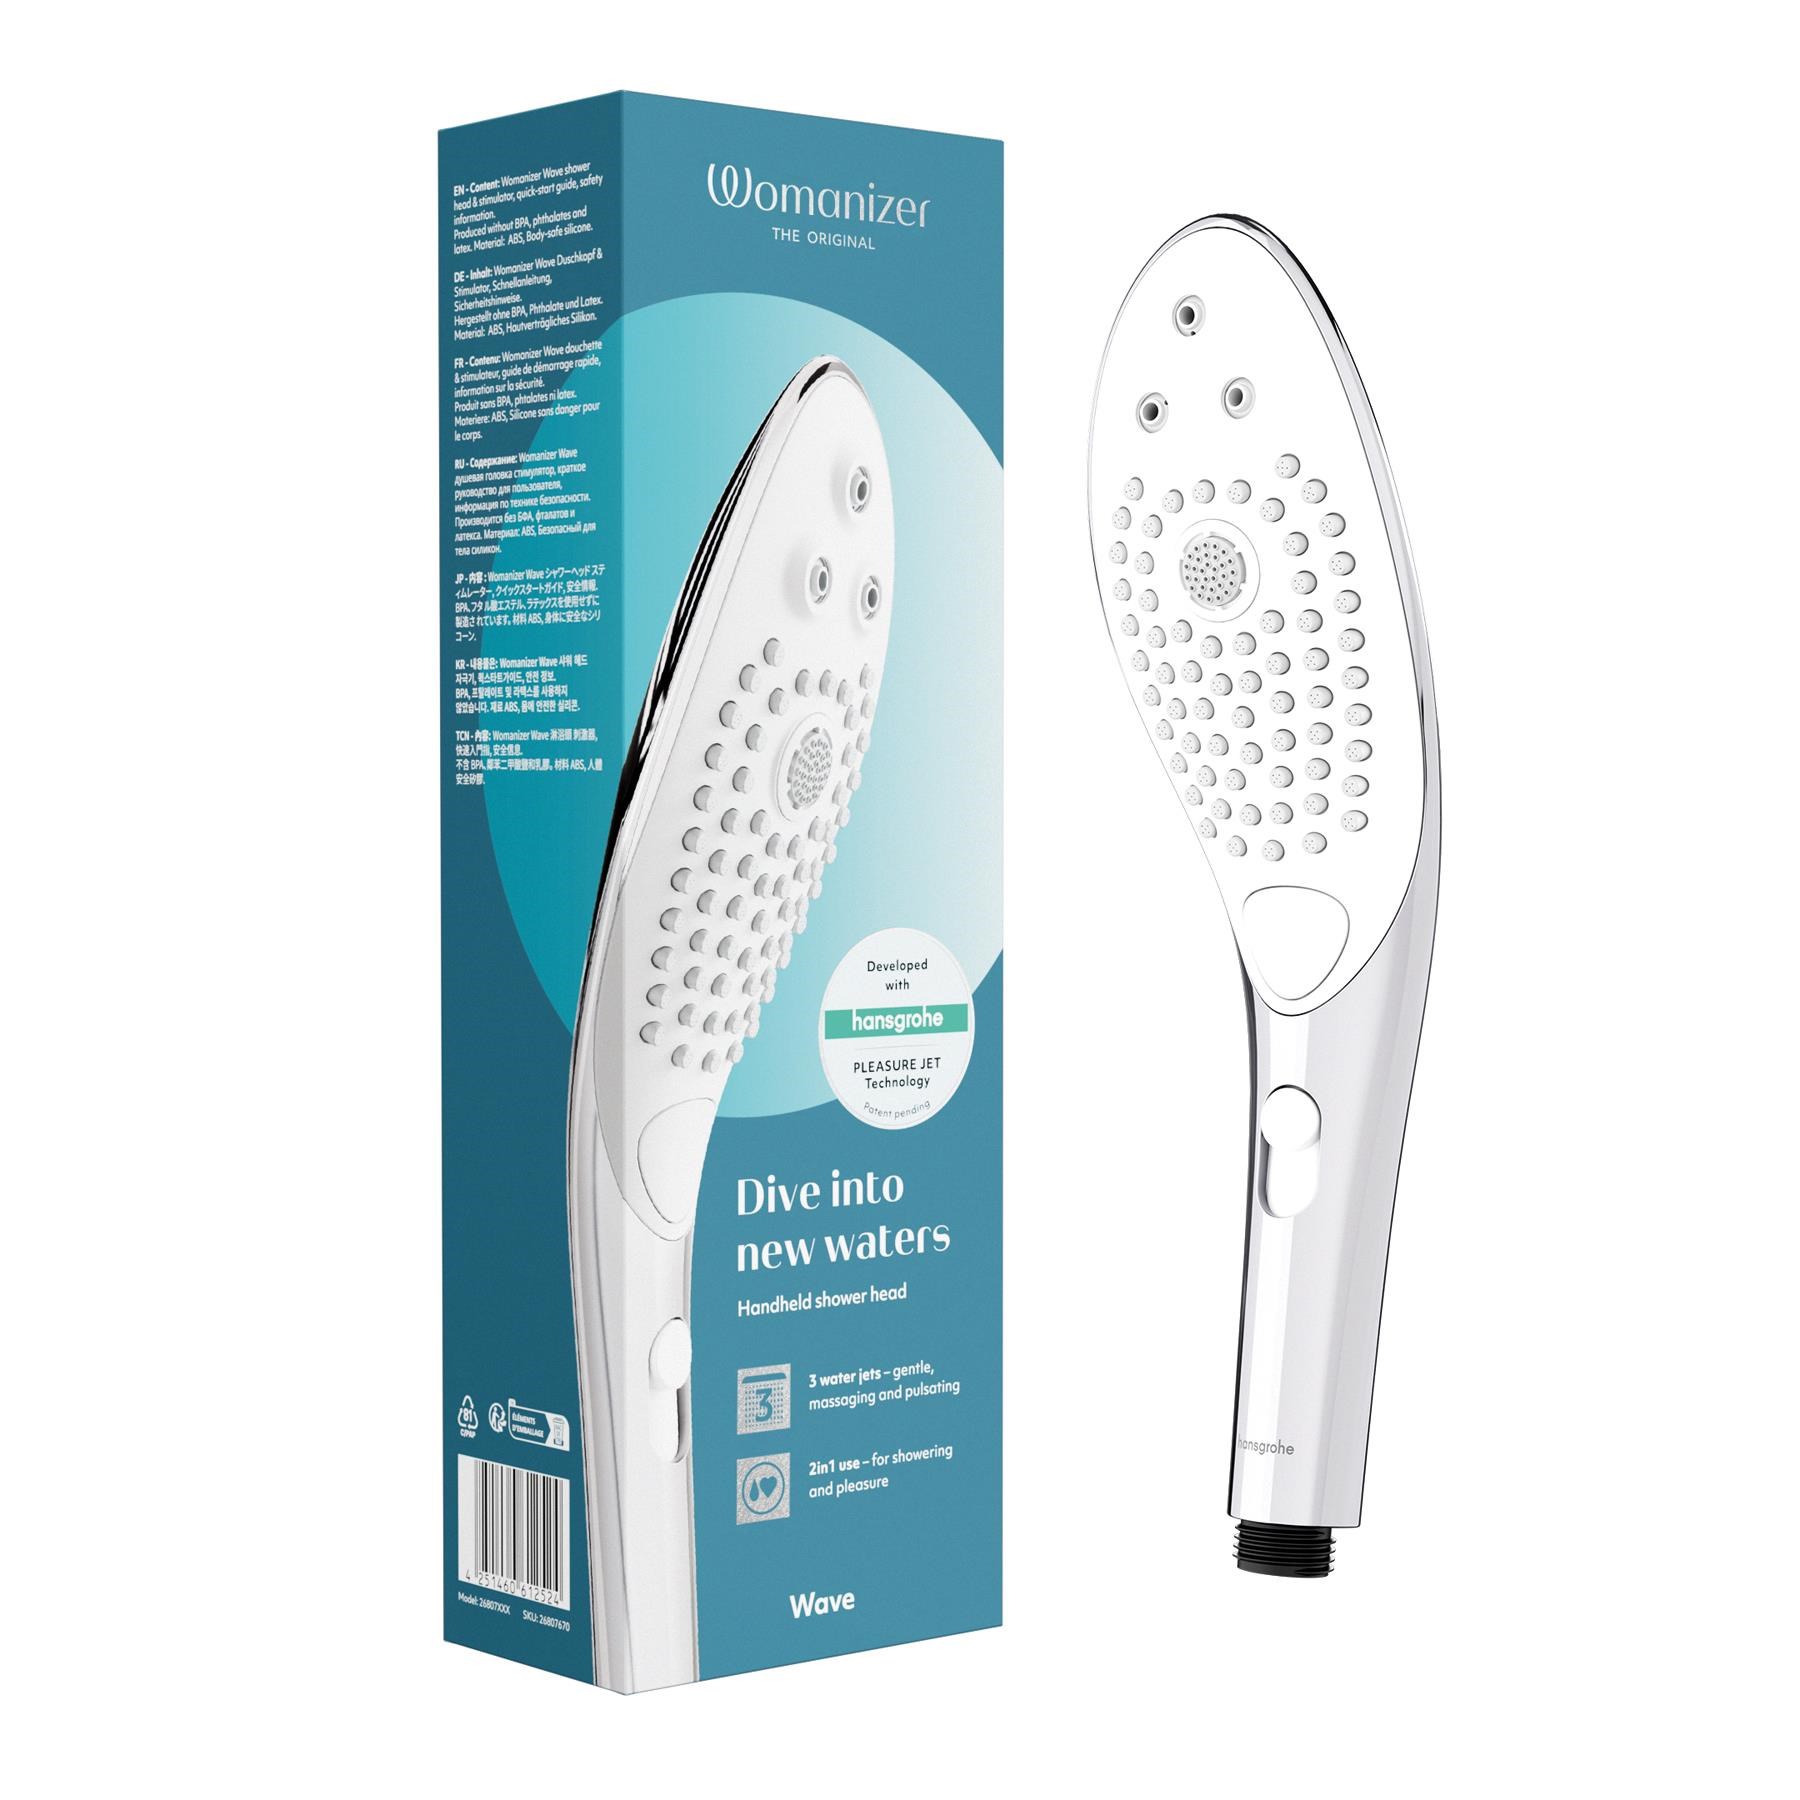 Womanizer Wave Pleasure Jet Shower Attachment - Product and Packaging